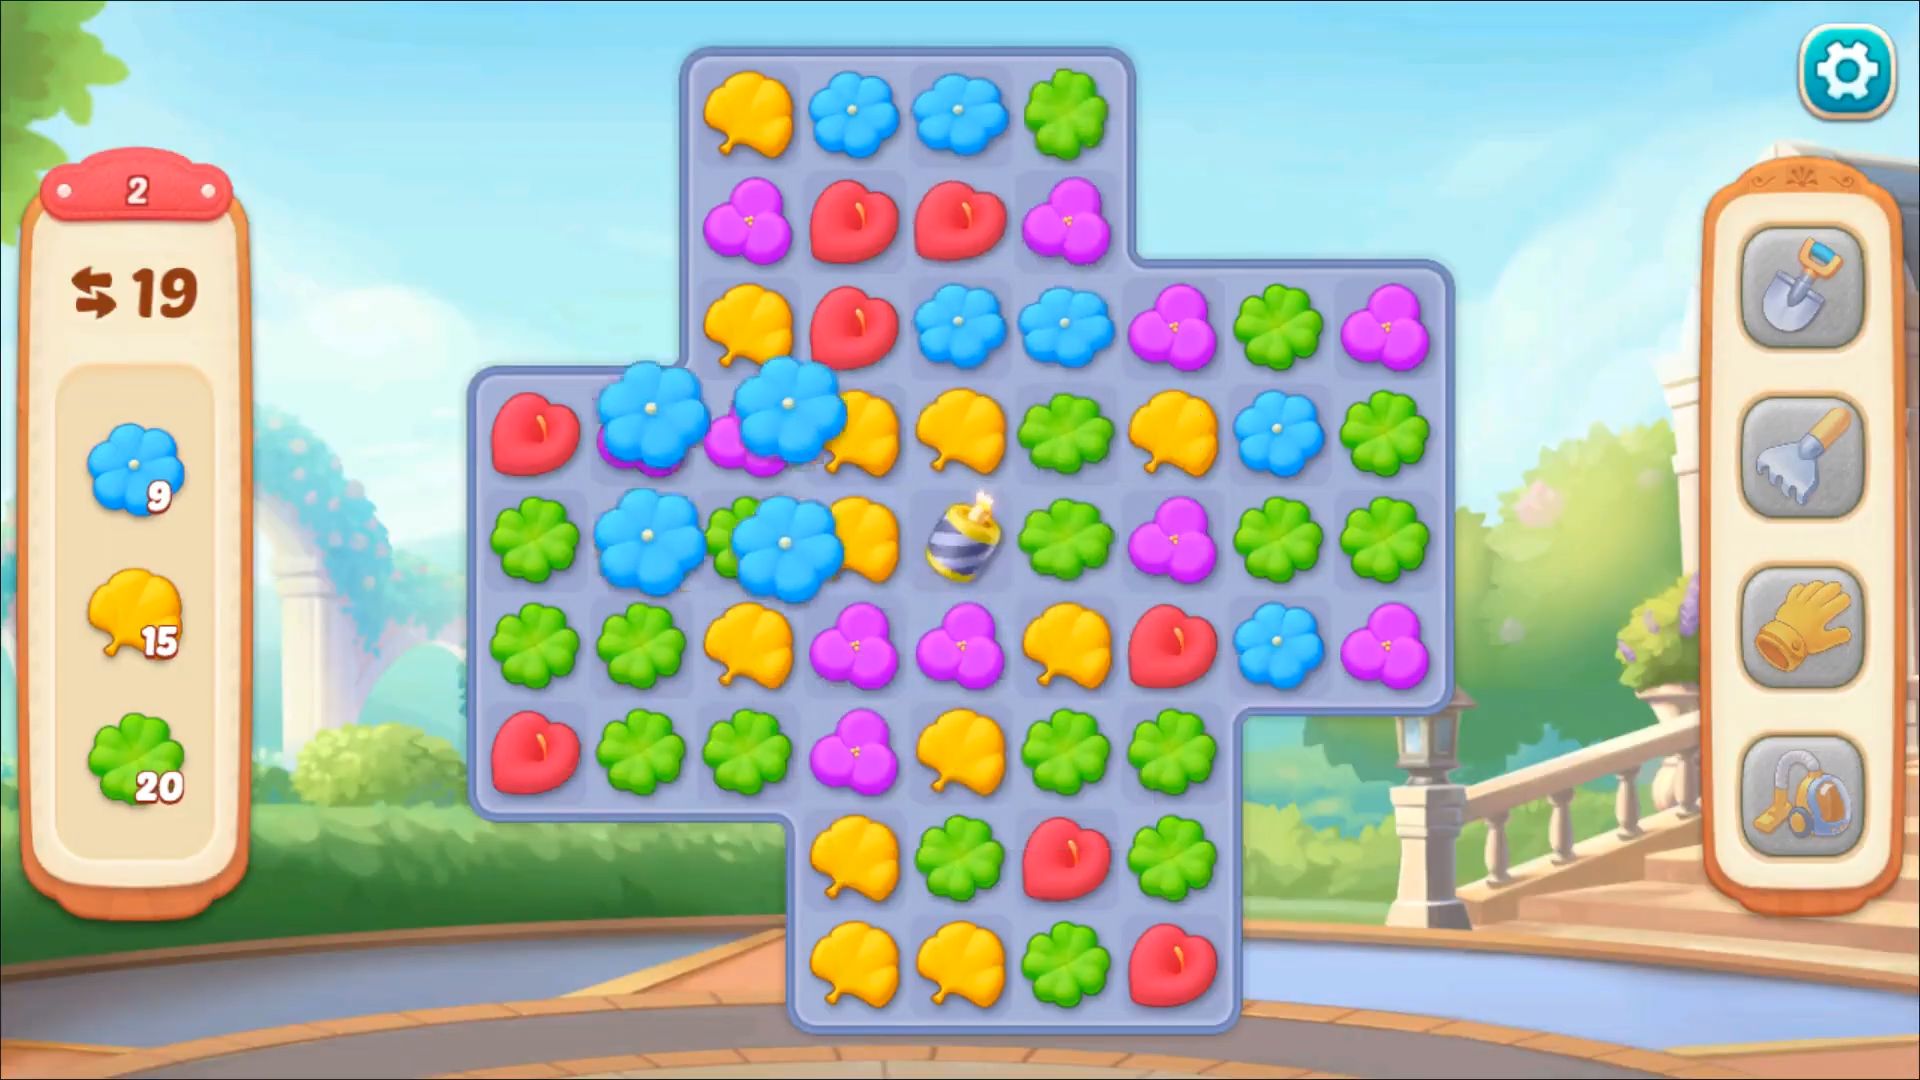 Gameplay of the Garden Affairs for Android phone or tablet.